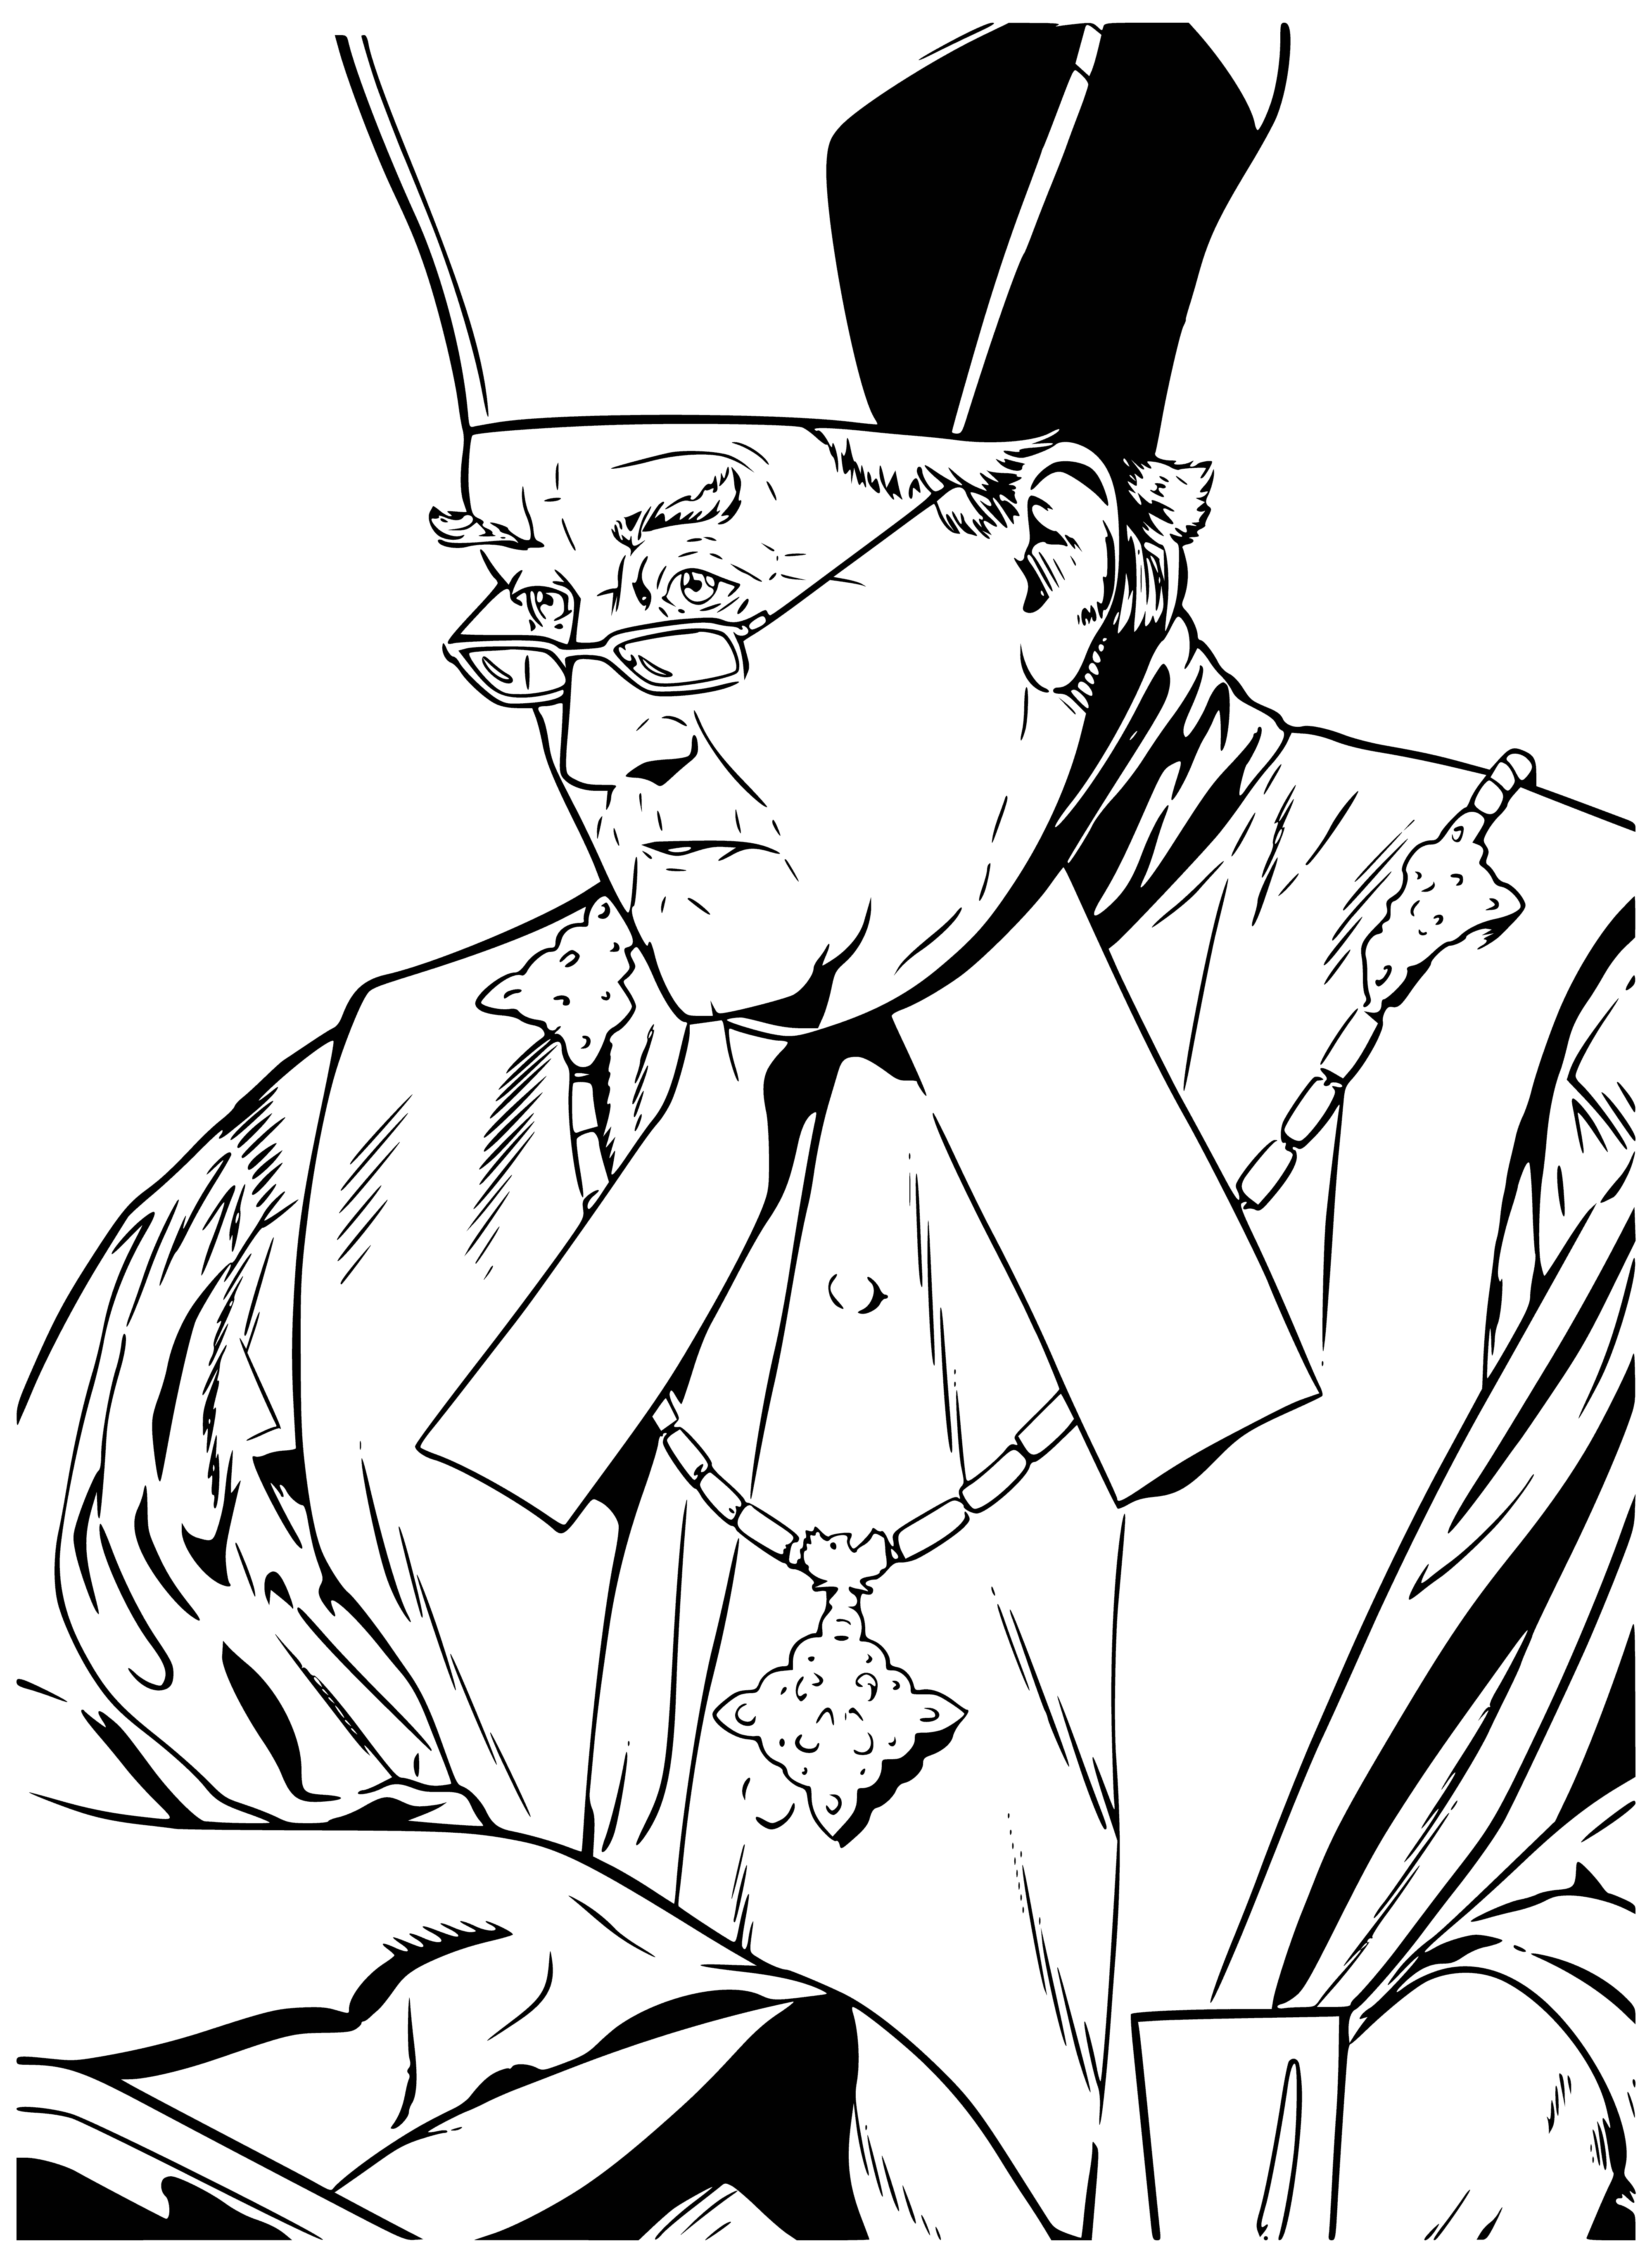 coloring page: Coloring page of Cornelius Fudge, Minister of Magic in Harry Potter, in his 50s-60s wearing purple robes, gold trim & black hat w/green brim.